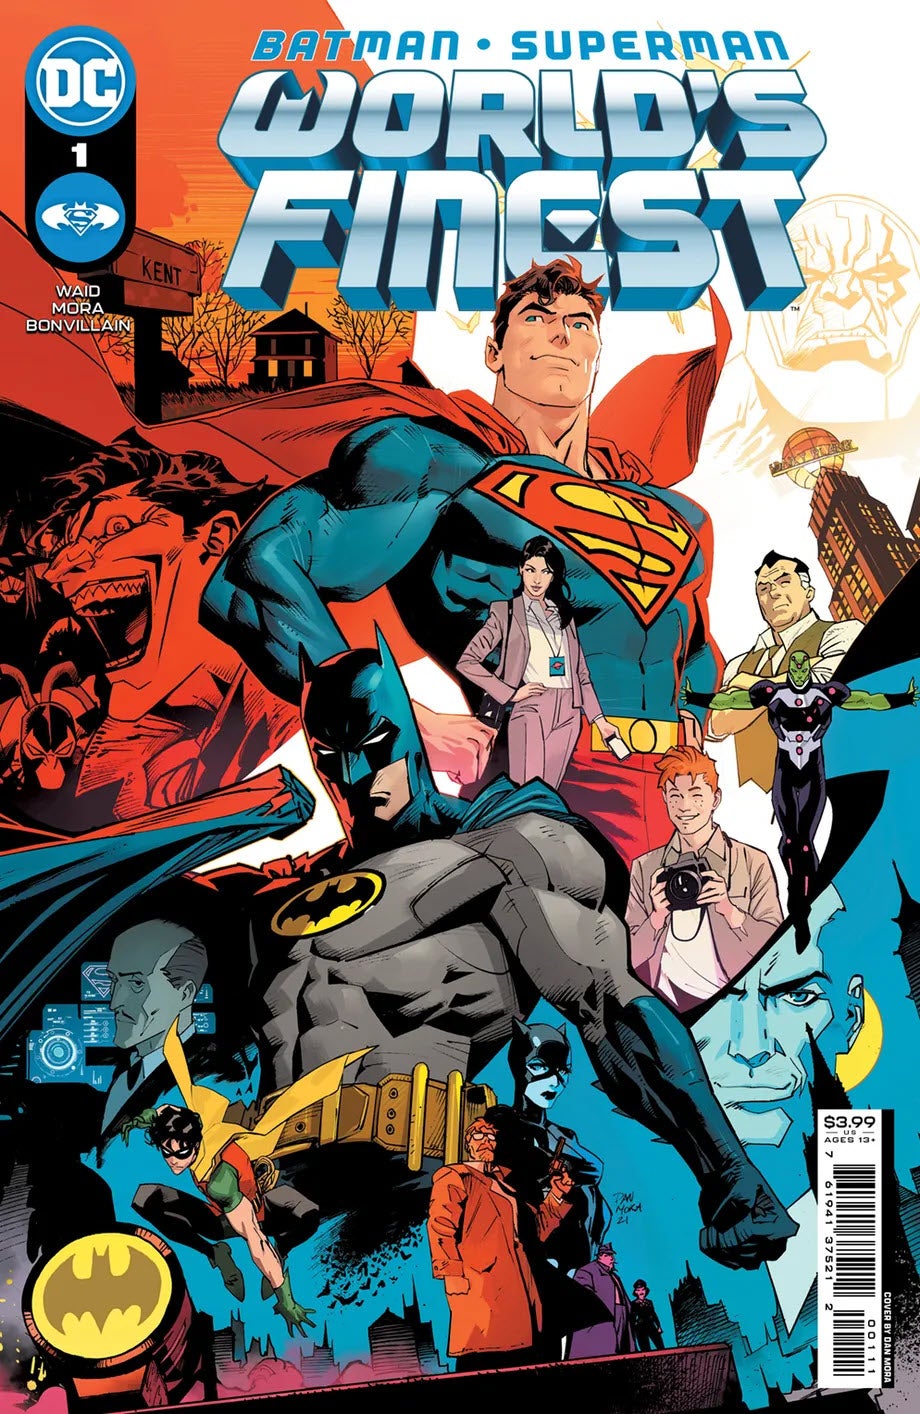 Illustrated cover of World's Finest featuring Superman and Batman